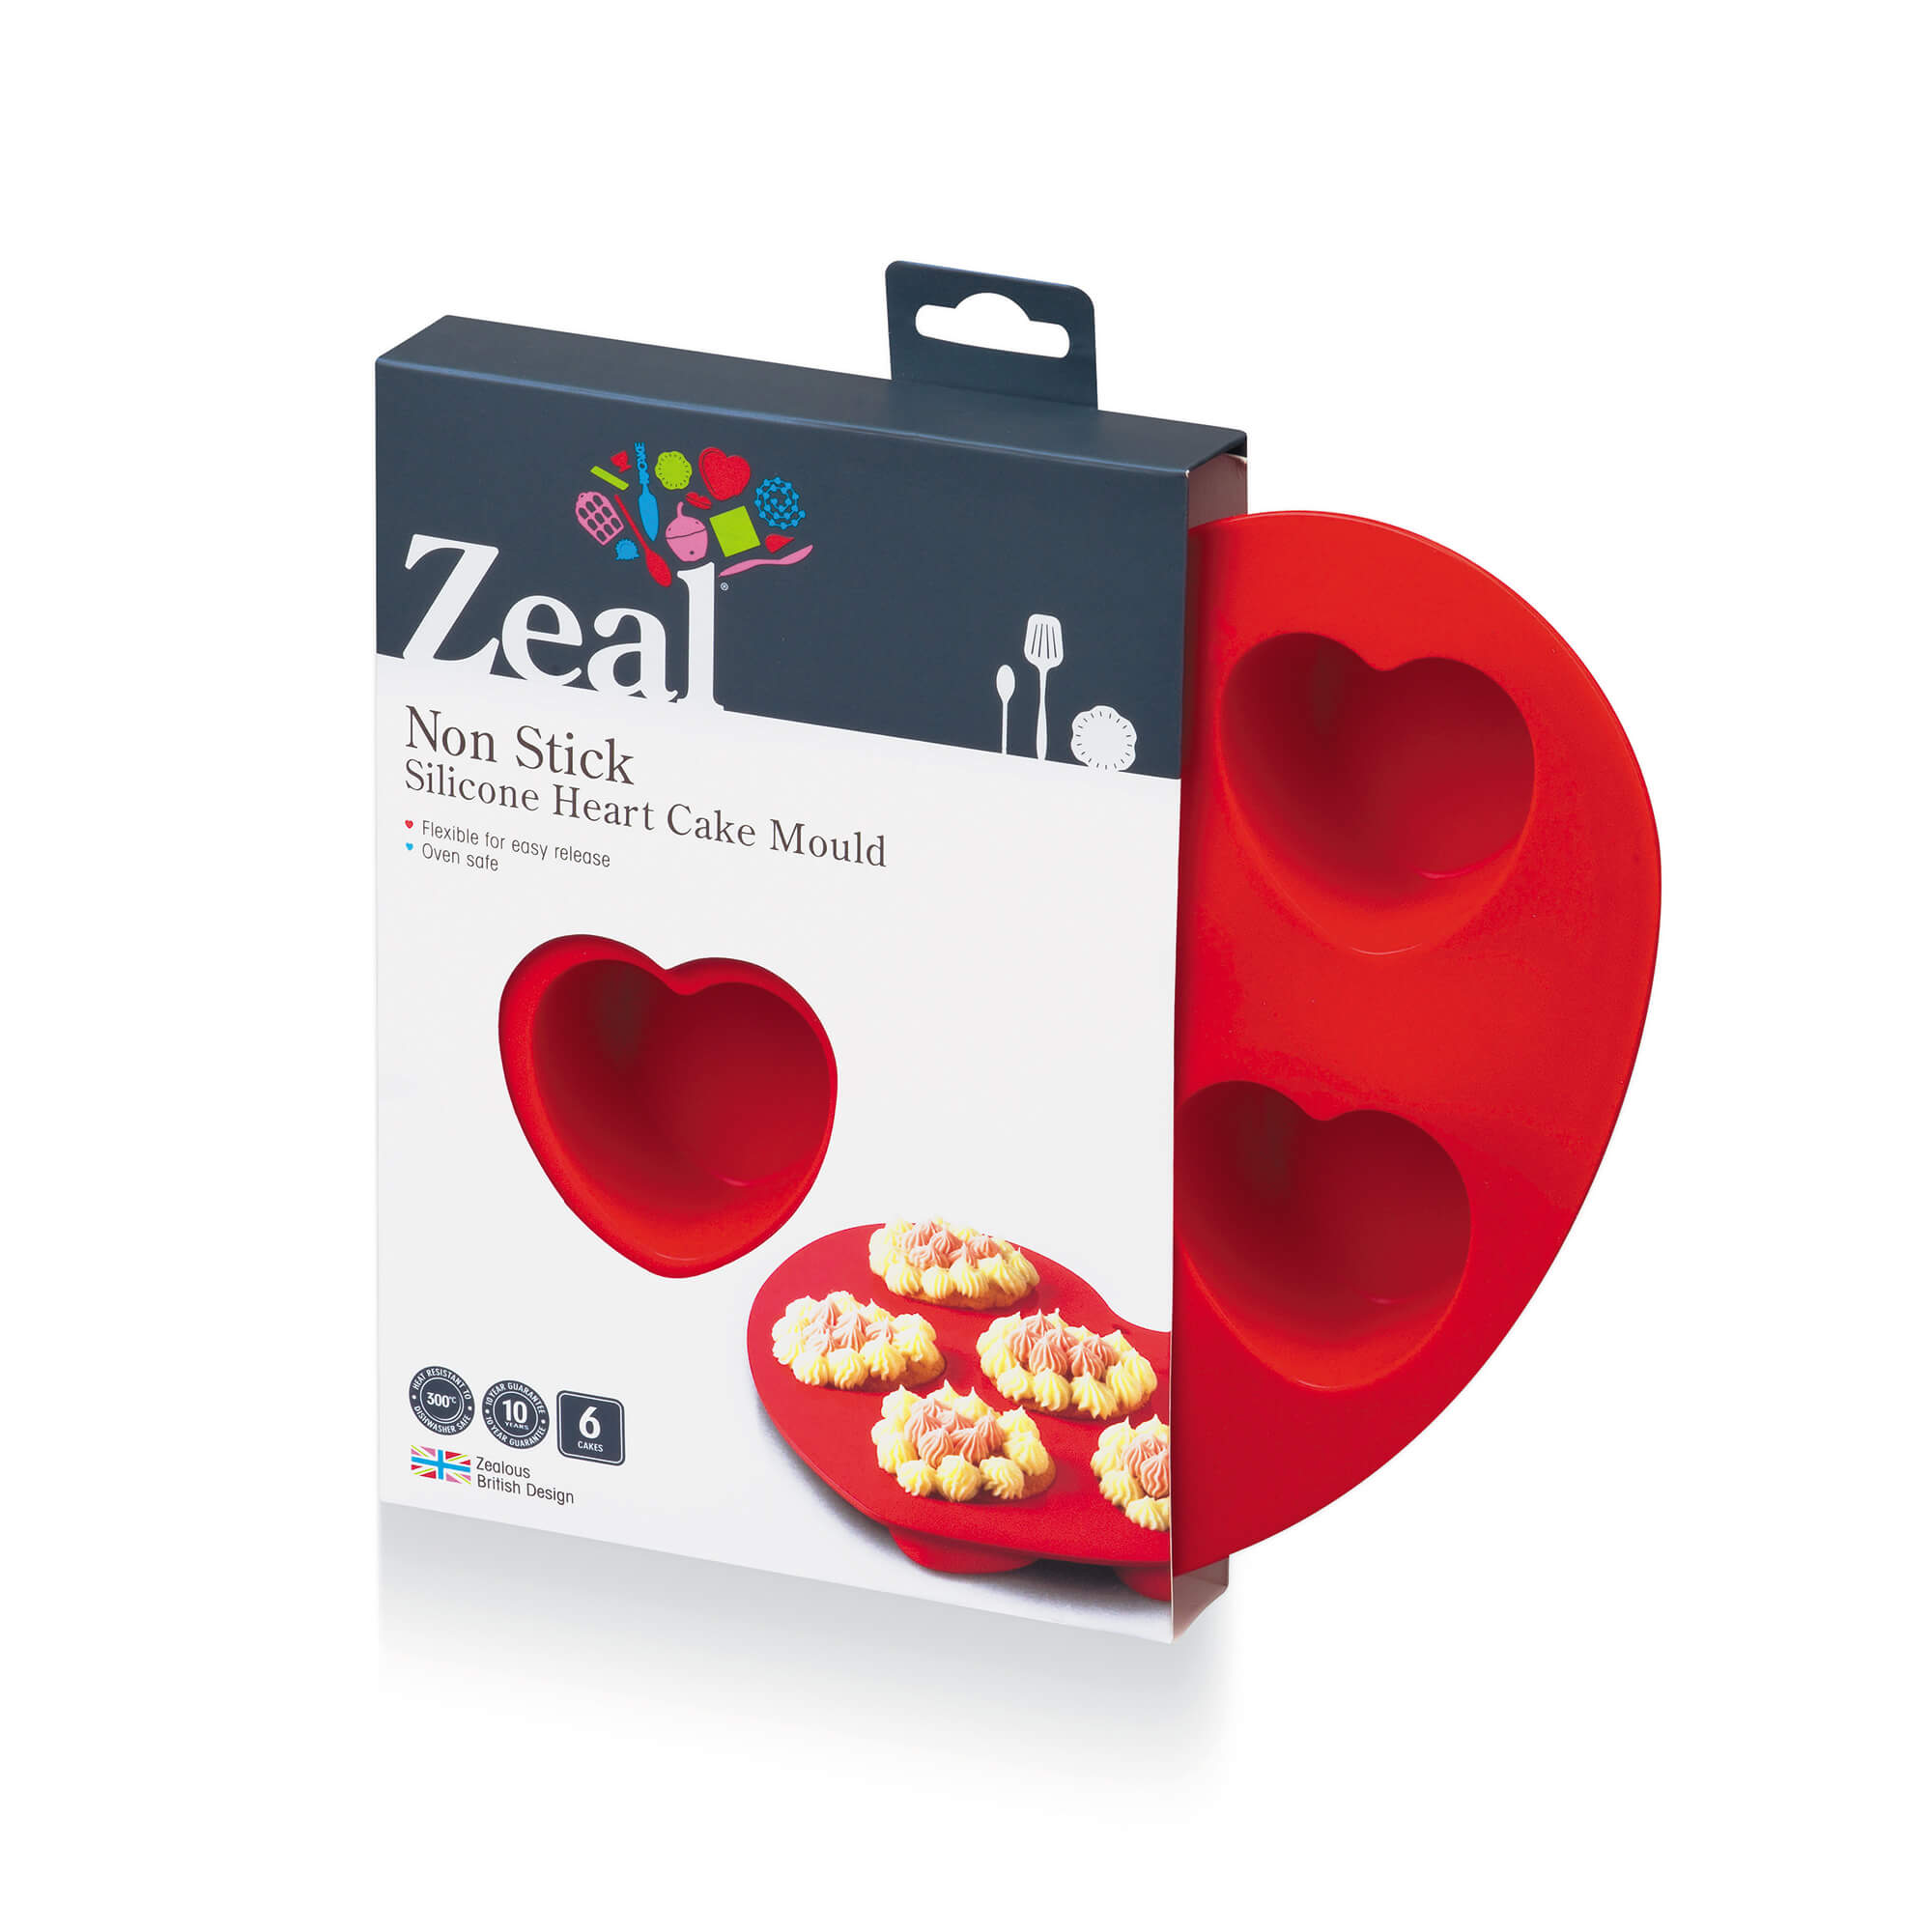 Zeal 6 Cup Non Stick Silicone Heart Fairy Cake Mould in packaging